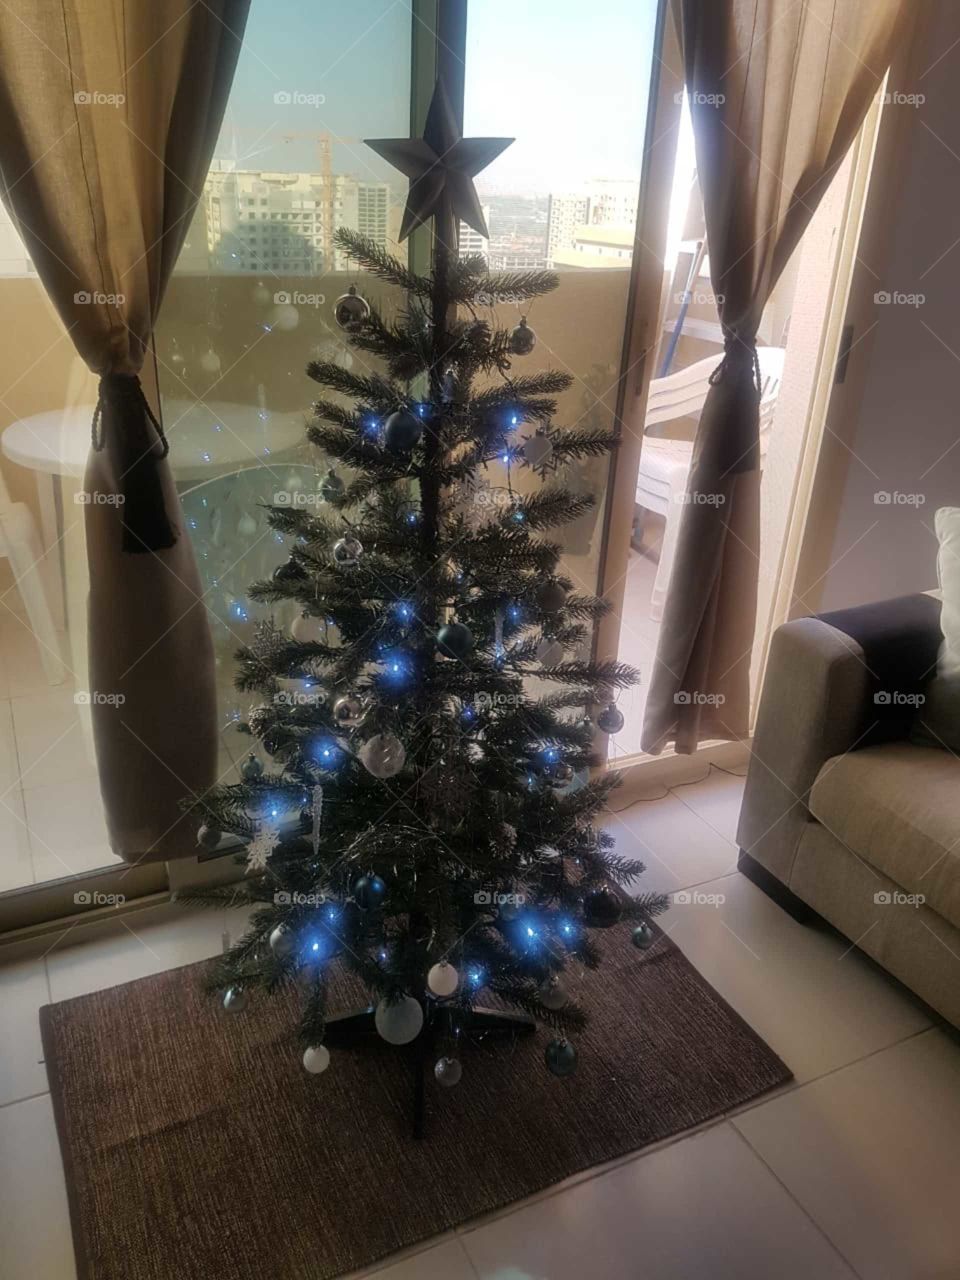 A little pic of a Xmas Tree